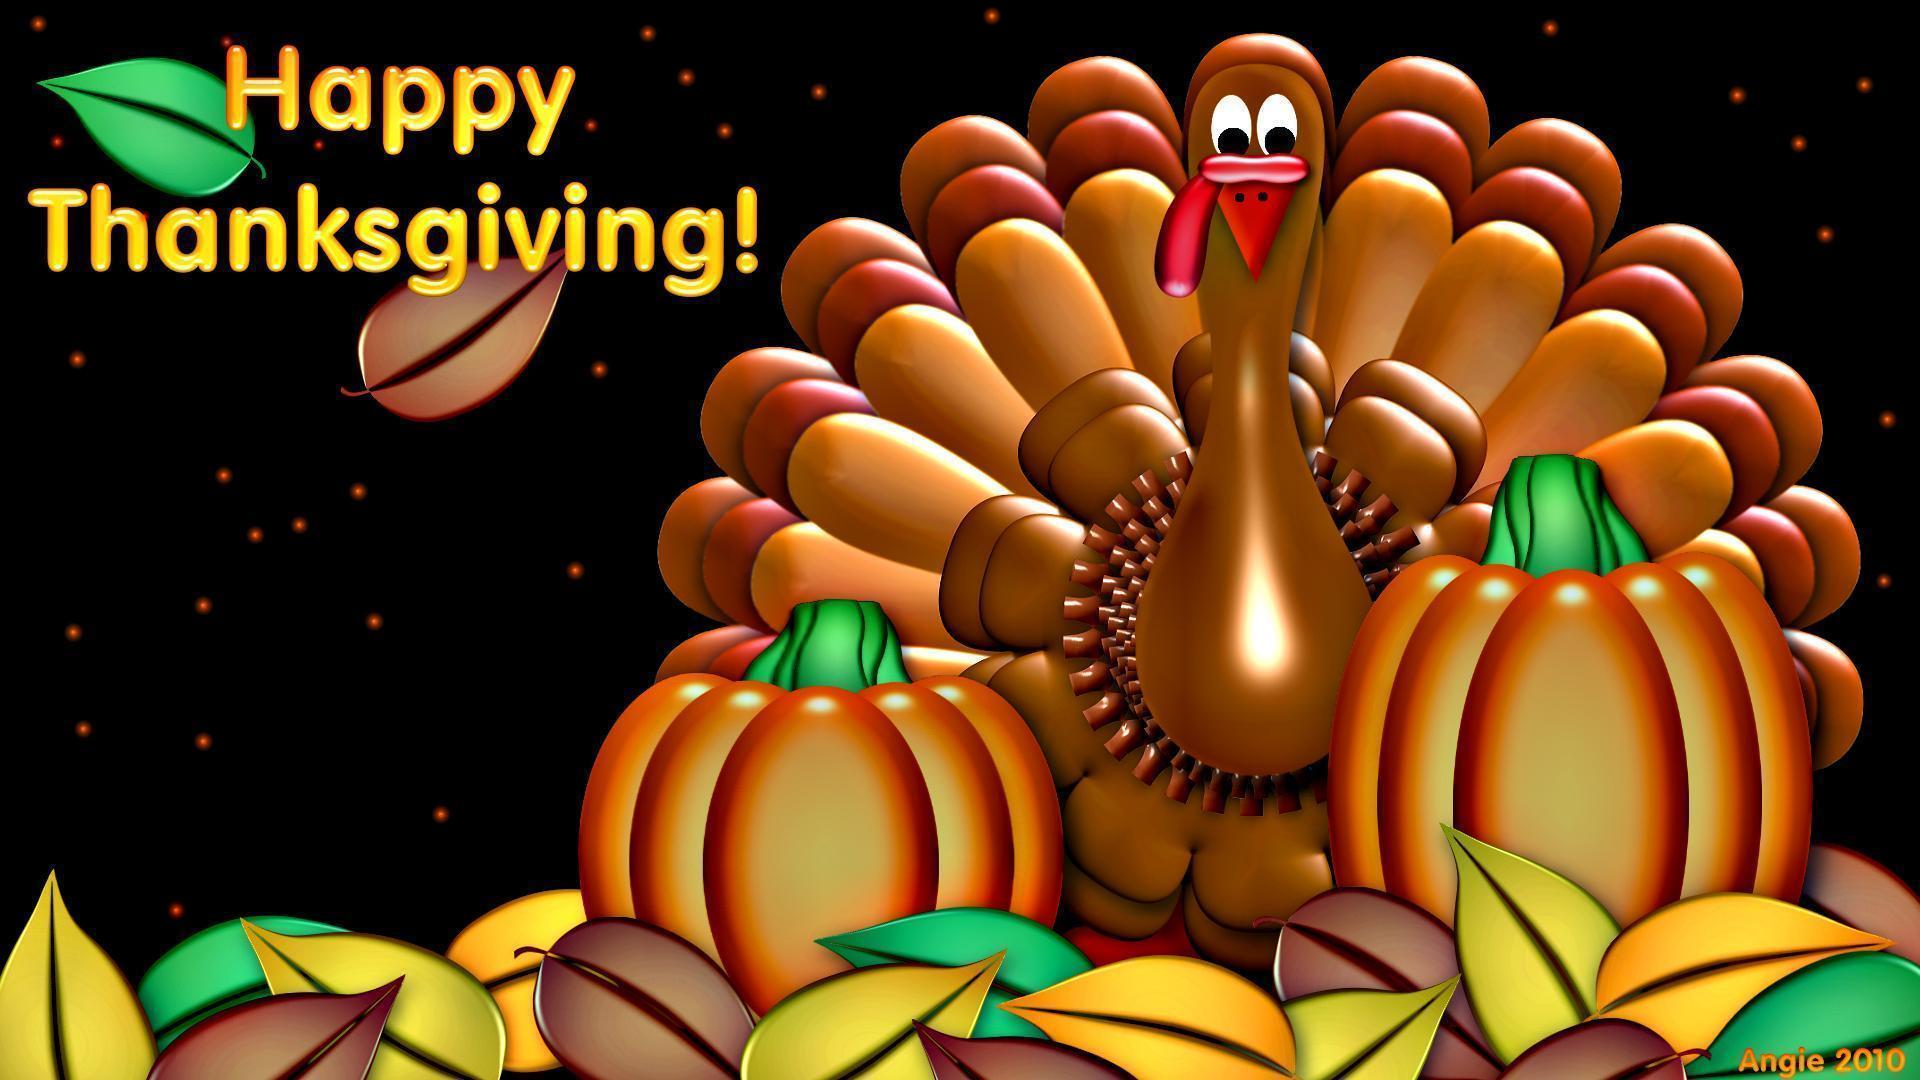 Happy Thanksgiving Pictures, image, Pics, Photos, Wallpapers 2014